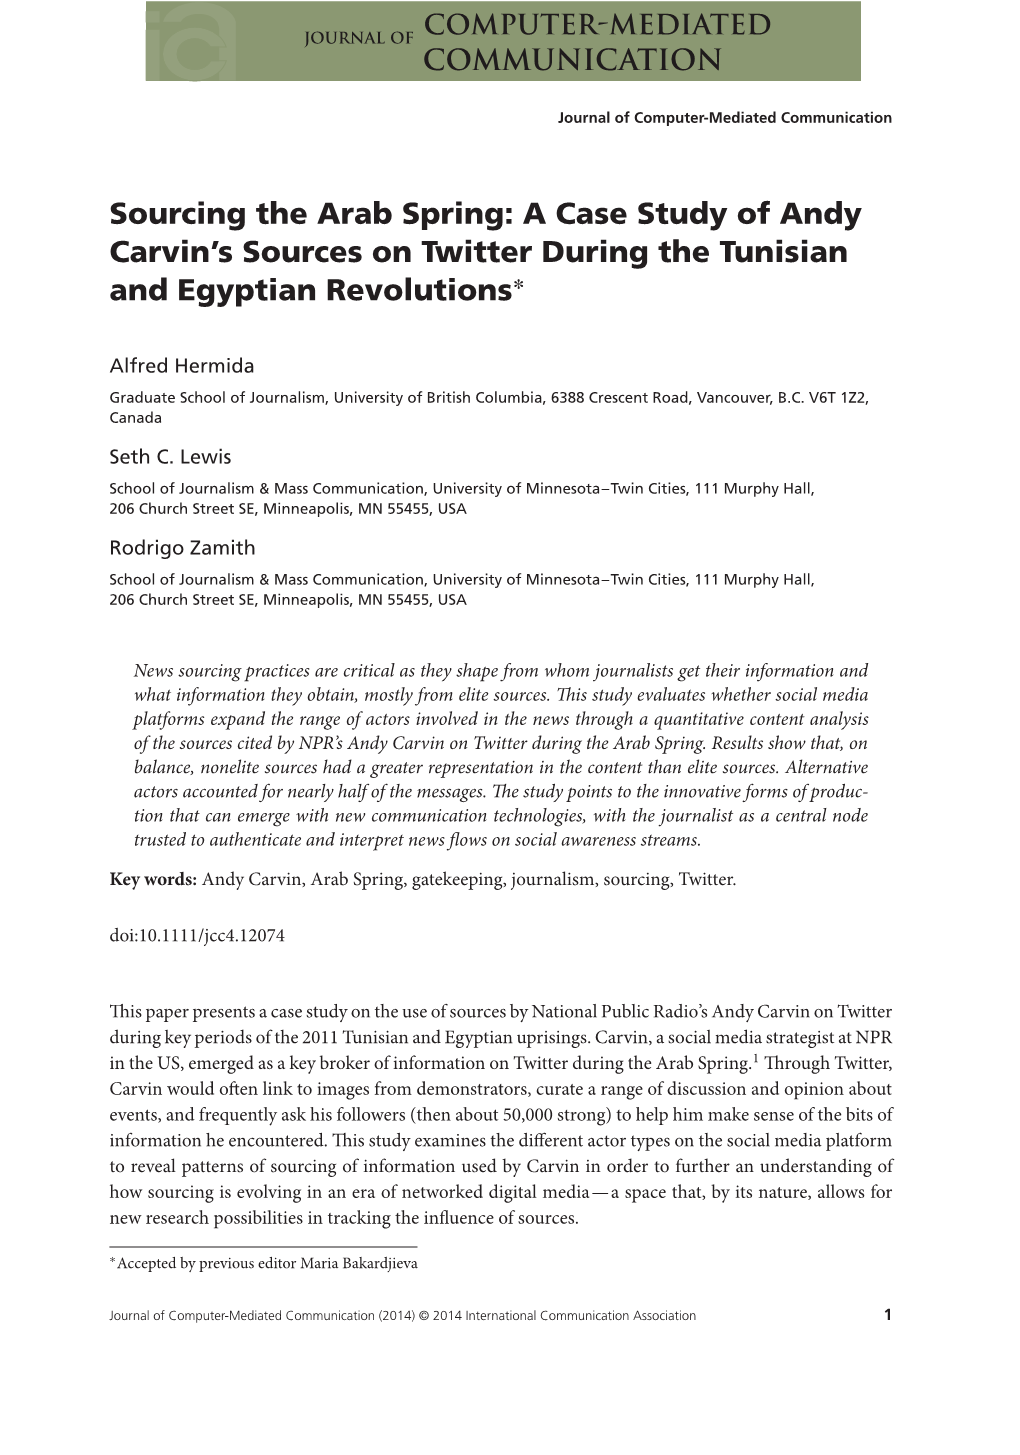 A Case Study of Andy Carvins Sources on Twitter During the Tunisian and Egyptian Revolutions